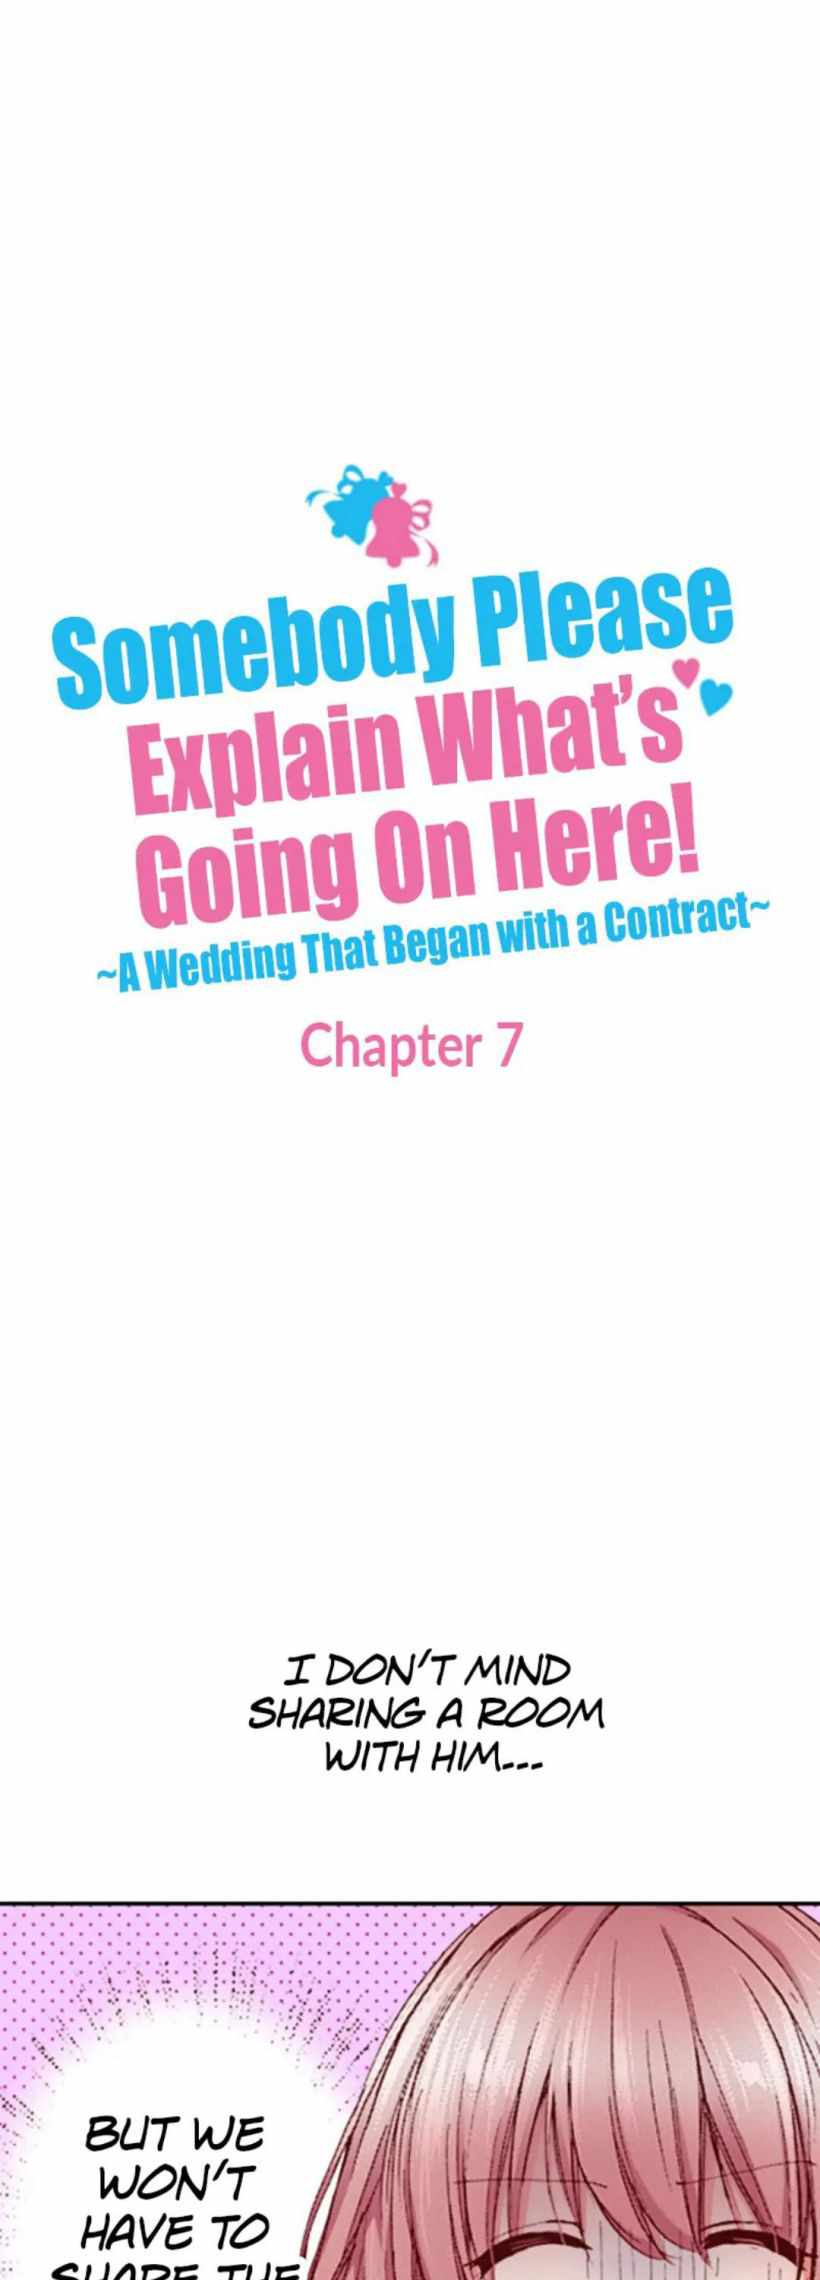 Somebody Please Explain What's Going On Here! ~A Wedding that Began With a Contract~ Chapter 7